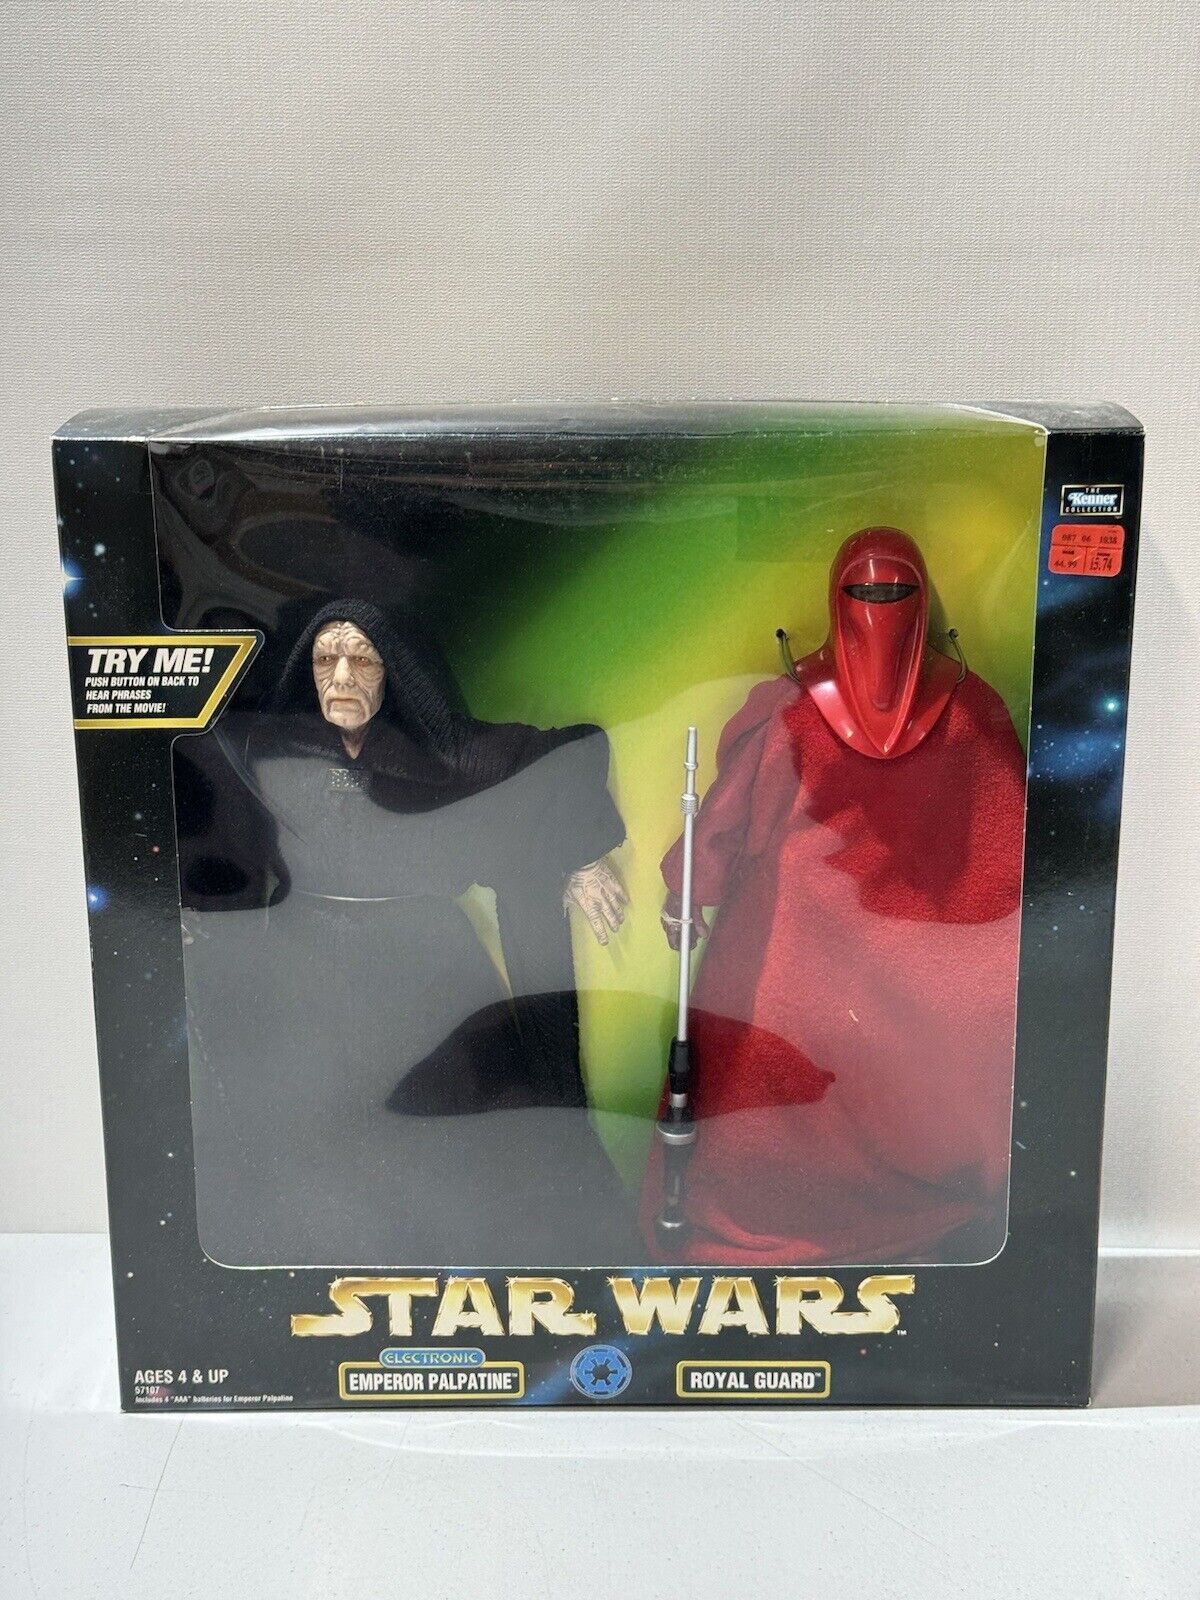 Star Wars EMPEROR PALPATINE & ROYAL GUARD Action Collection 12” SEALED NEW BOX